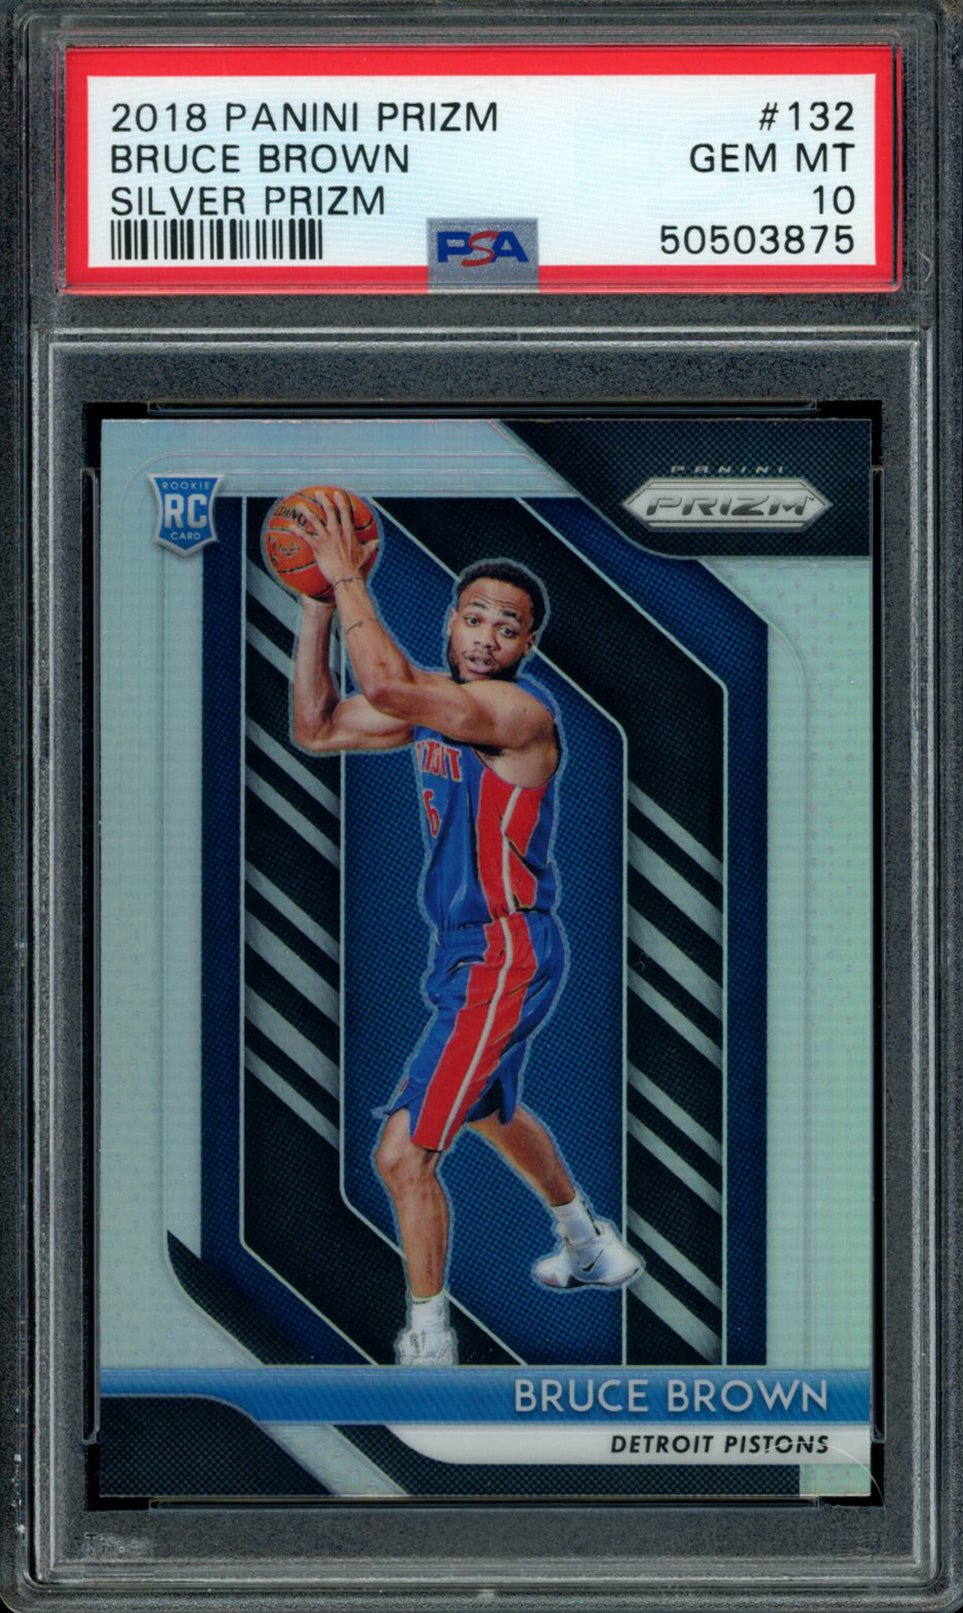 BRUCE BROWN PSA 10 2018-19 Panini Prizm RC Silver Prizm #132 Basketball Graded Cards Parallel RC - Hobby Gems